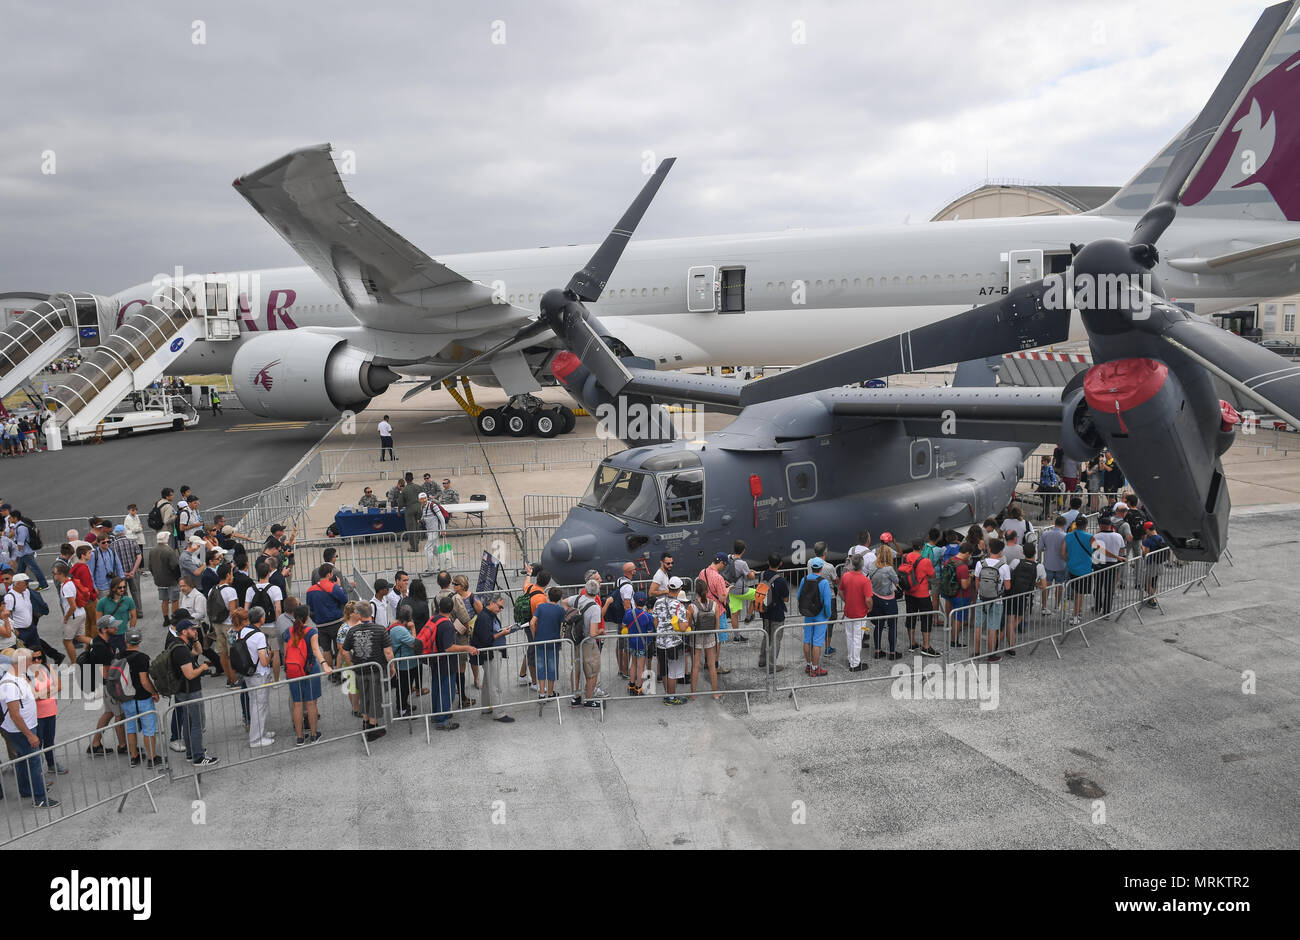 Air show attendees wait in line to tour a CV-22 Osprey from Royal Air Force Mildenhall, England, at Le Bourget Airport, France, during the Paris Air Show, June 23, 2017. The Paris Air Show offers the U.S. a unique opportunity to showcase their leadership in aerospace technology to an international audience. By participating, the U.S. hopes to promote standardization and interoperability of equipment with their NATO allies and international partners. This year marks the 52nd Paris Air Show and the event features more than 100 aircraft from around the world. (U.S. Air Force photo/ Tech. Sgt. Rya Stock Photo